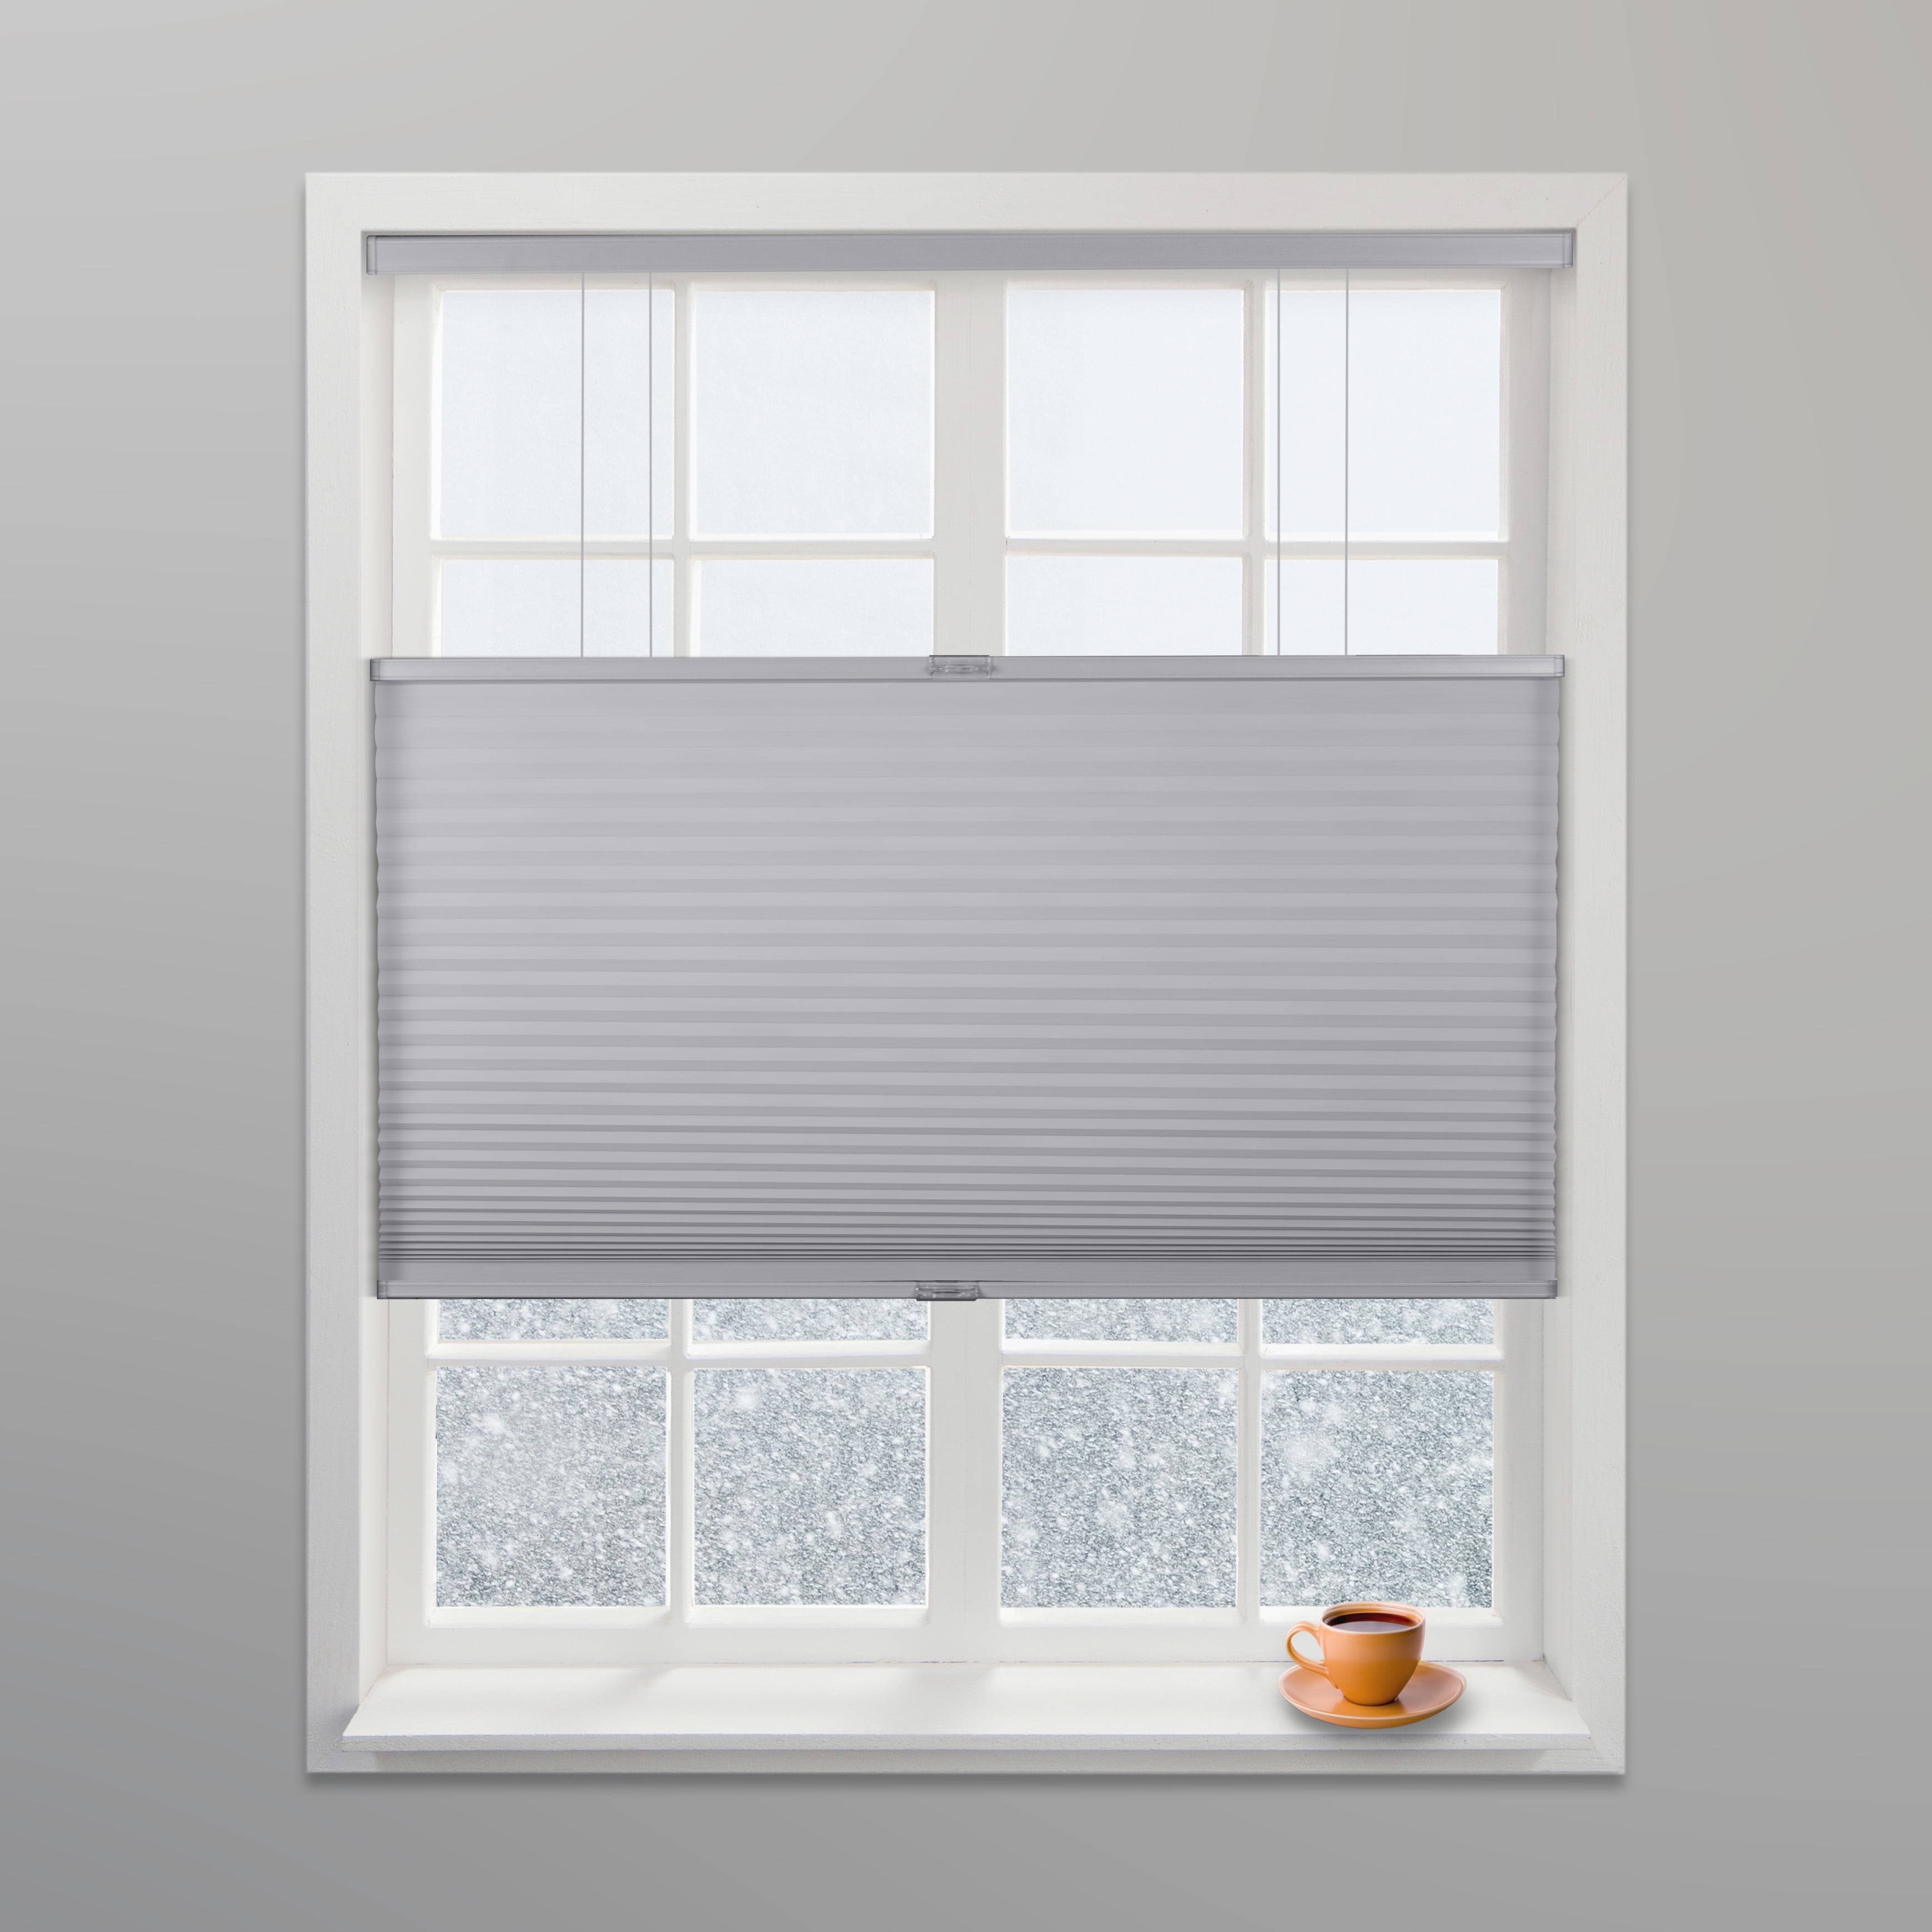 Arlo Blinds Gray Light Filtering Top Down Bottom Up Deluxe Cordless Cellular Shades Size 24 W X 60 H Cordless Honeycomb Blinds Walmart Com Walmart Com